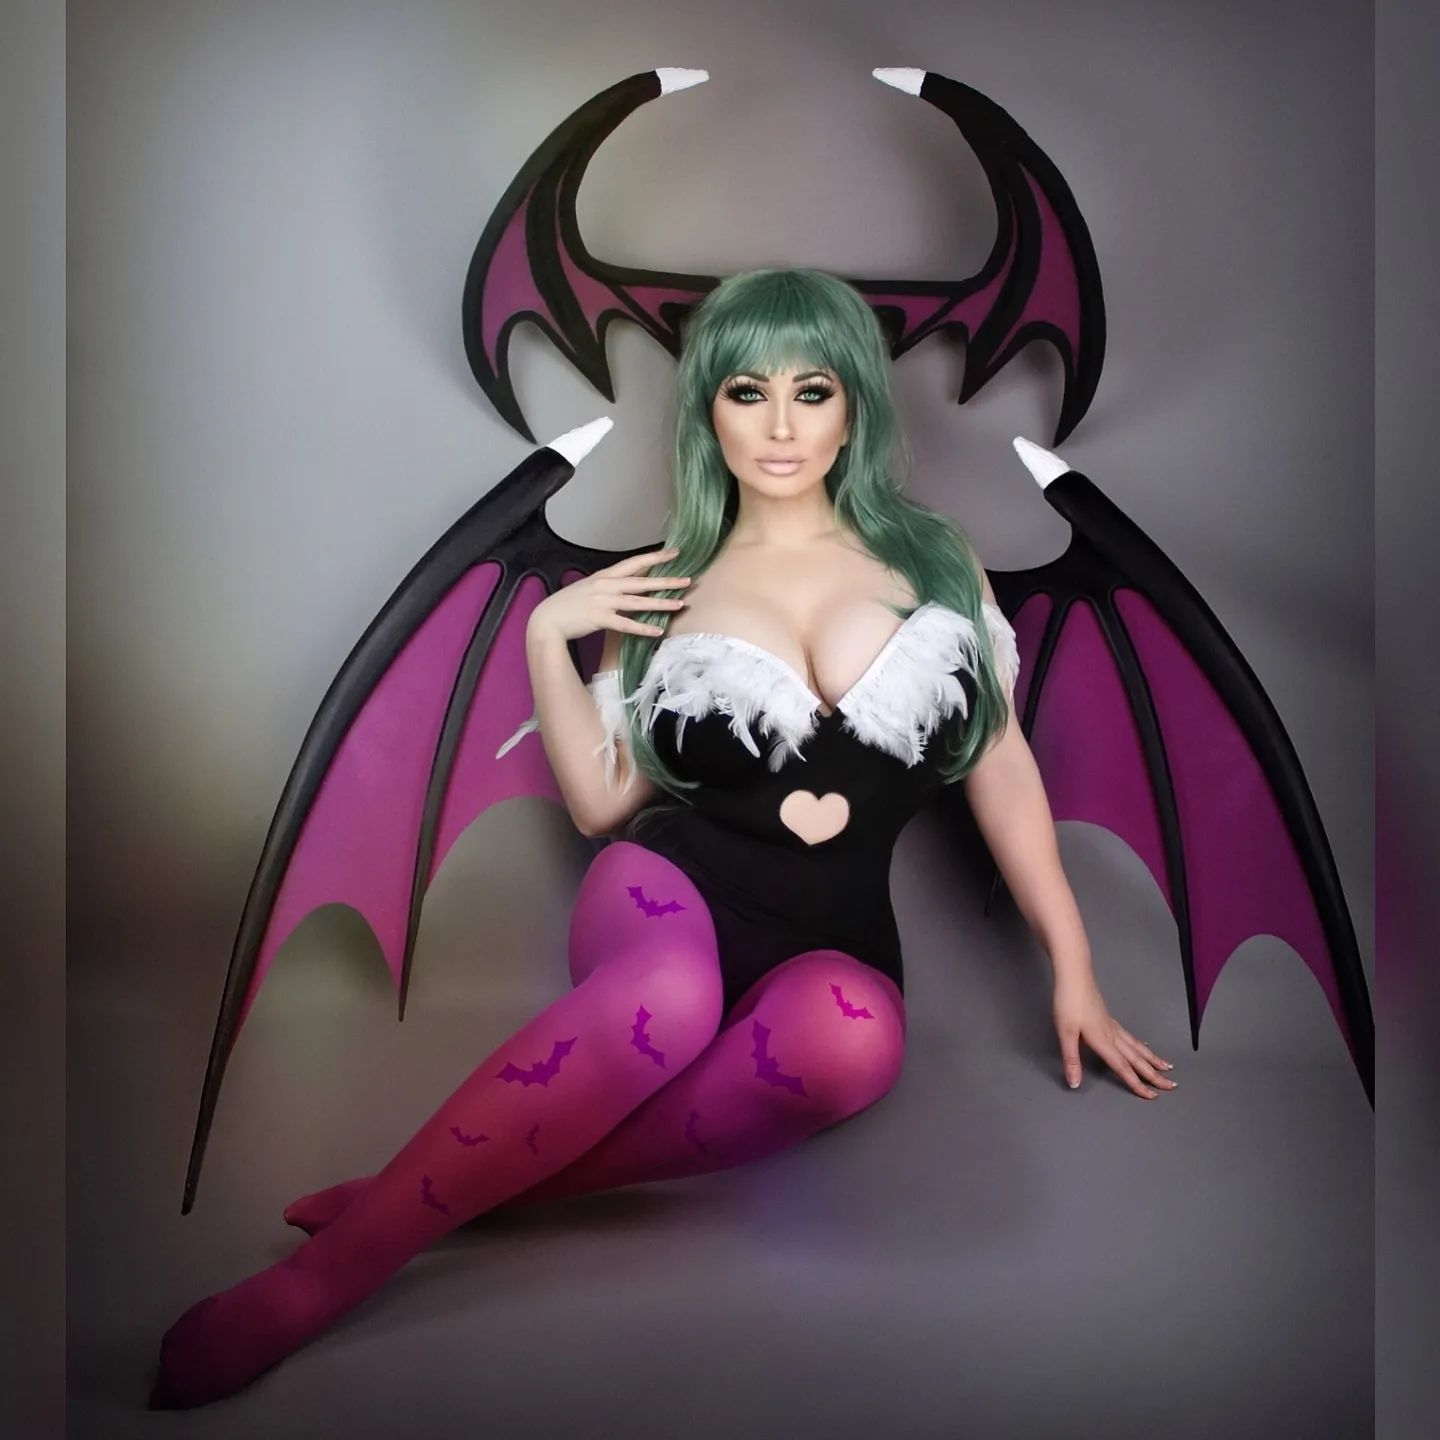 It's game night, what are we playing? 
Throwback to my Morrigan 💜
Follow 👉🏻 @ivytenebrae